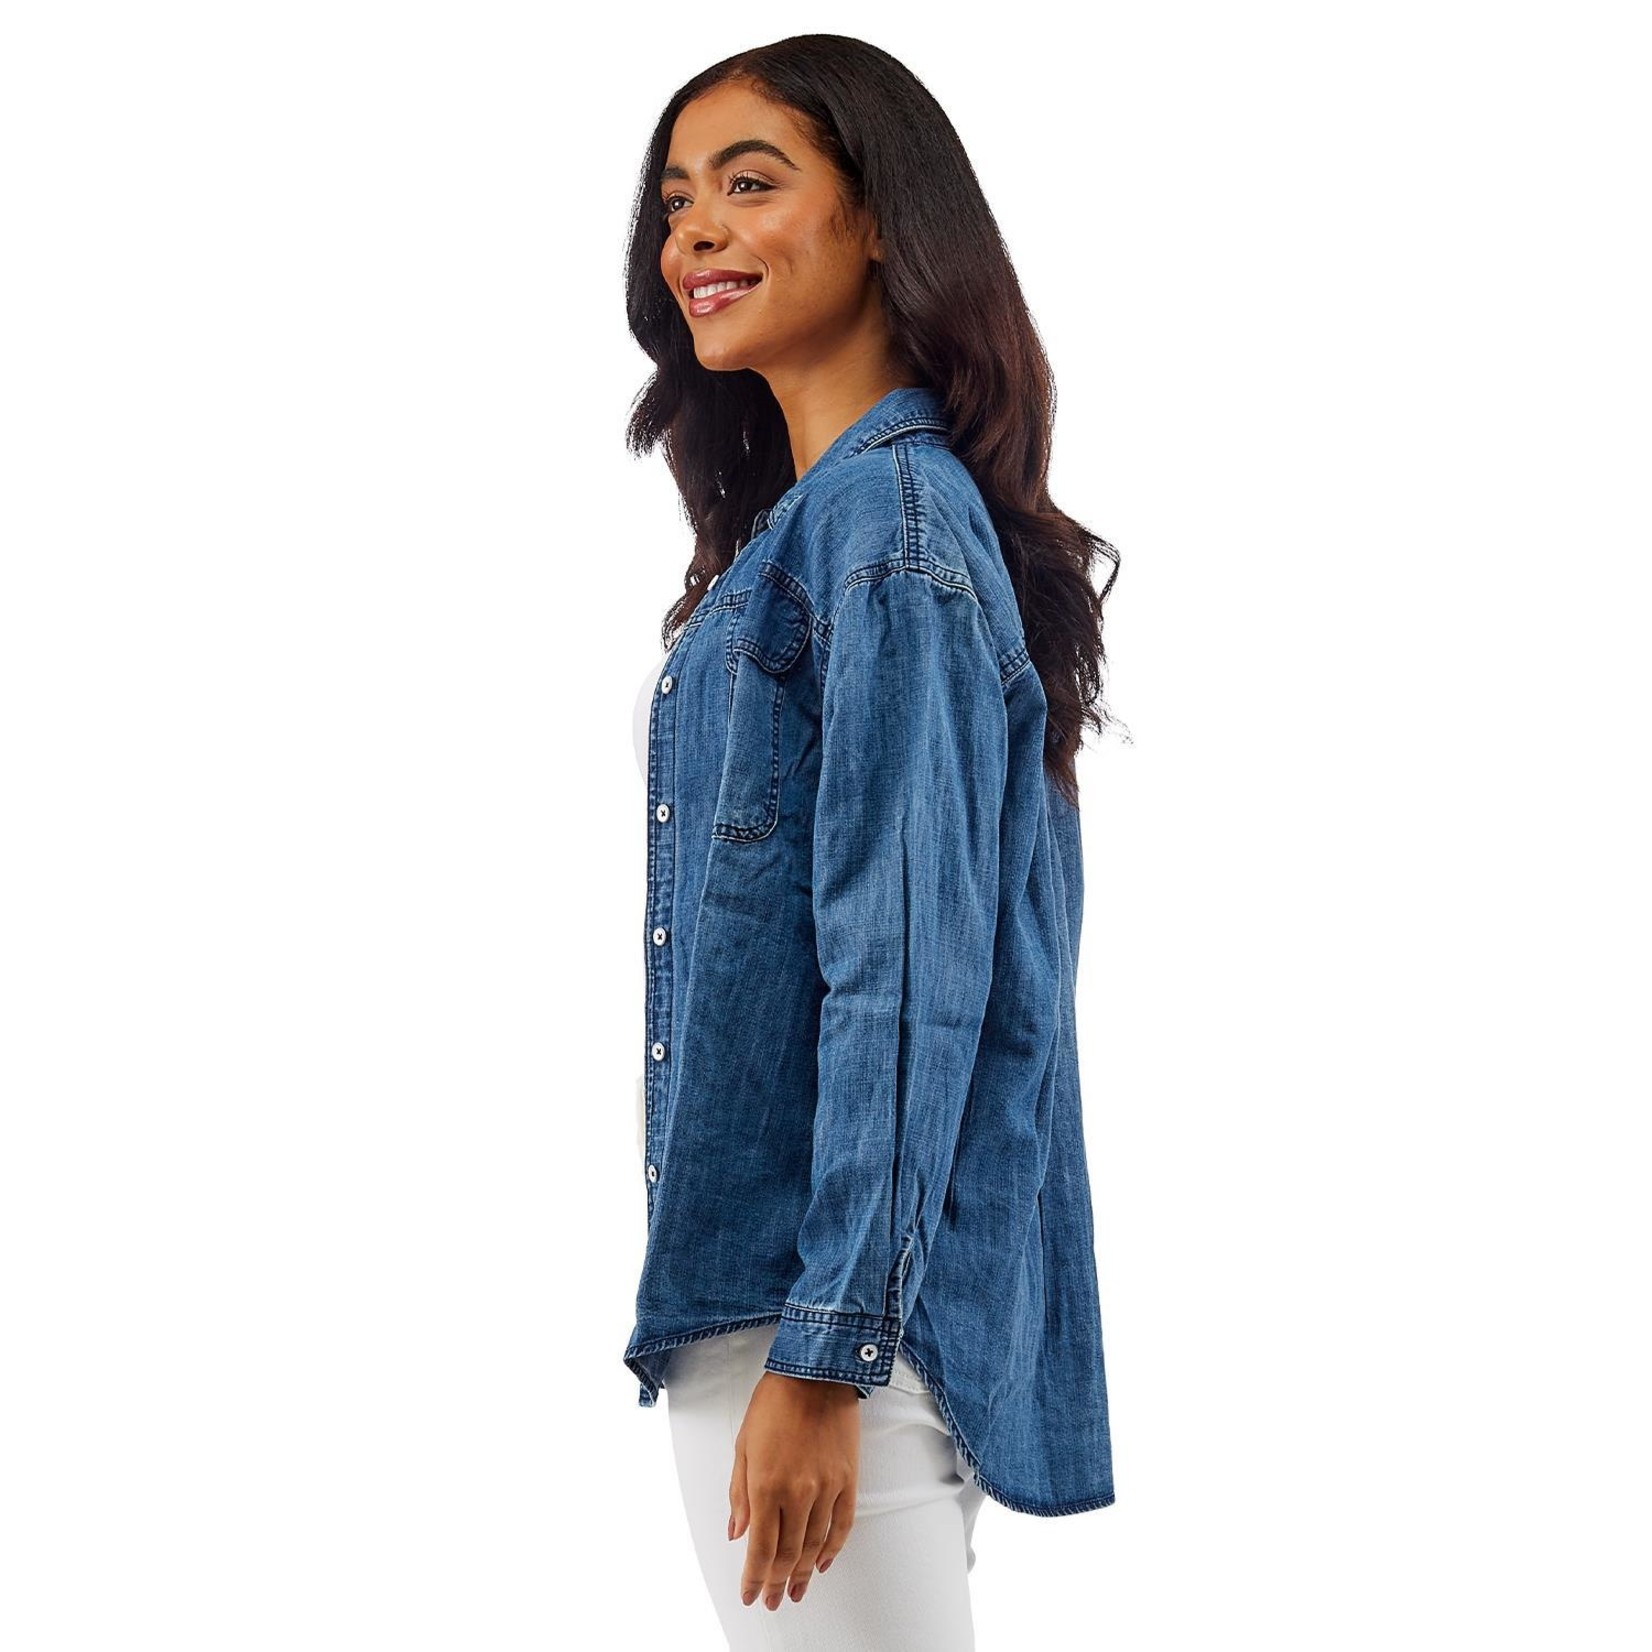 Two's Company Buttoned Up Super Soft Denim Shirt (one size fits most)